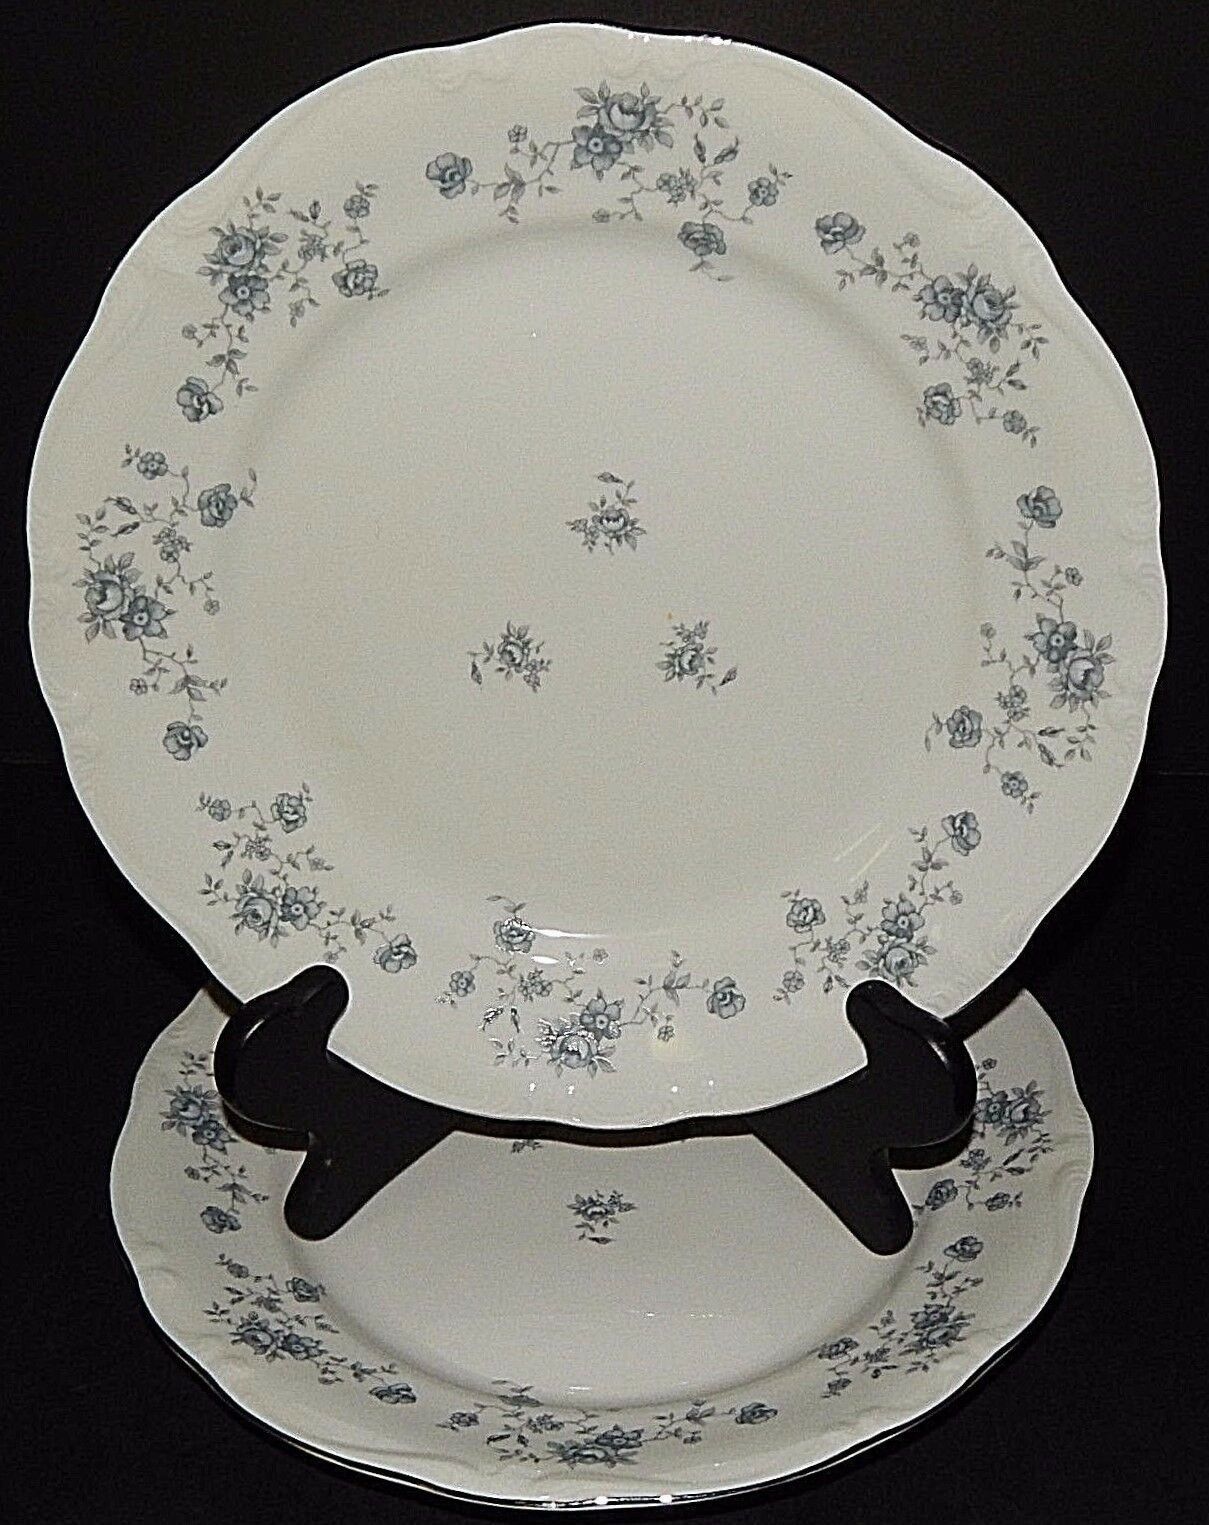 Bavaria Germany Saucer Bread and Butter Plate Berry Bowl Dinner Plate 5 piece place setting Blue Garland Johann Haviland Coffee Cup